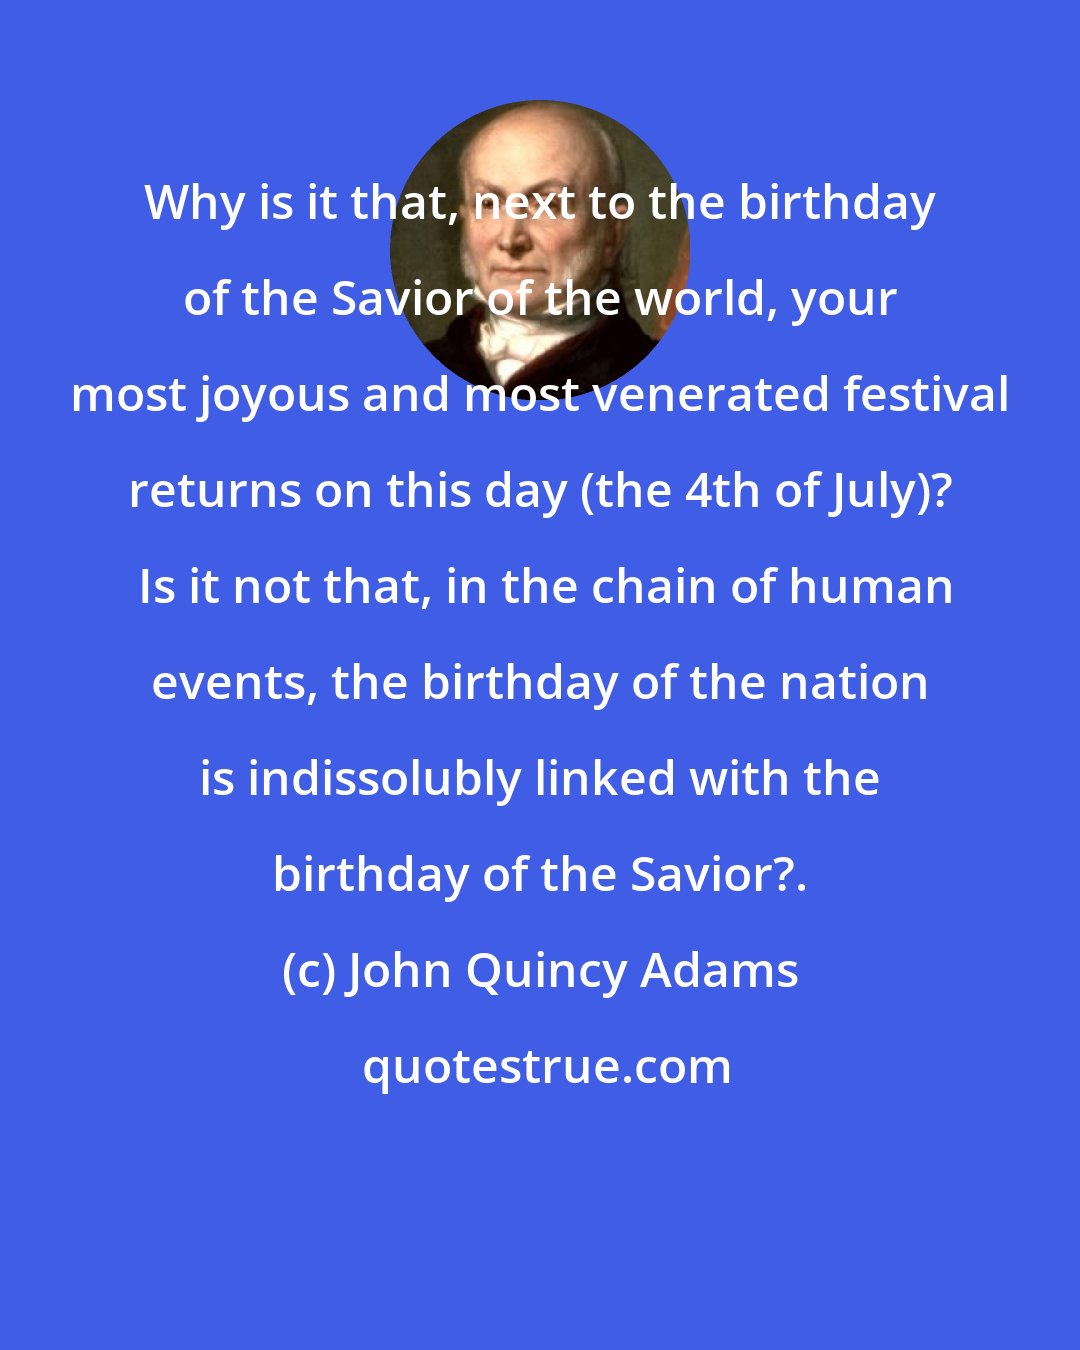 John Quincy Adams: Why is it that, next to the birthday of the Savior of the world, your most joyous and most venerated festival returns on this day (the 4th of July)?  Is it not that, in the chain of human events, the birthday of the nation is indissolubly linked with the birthday of the Savior?.